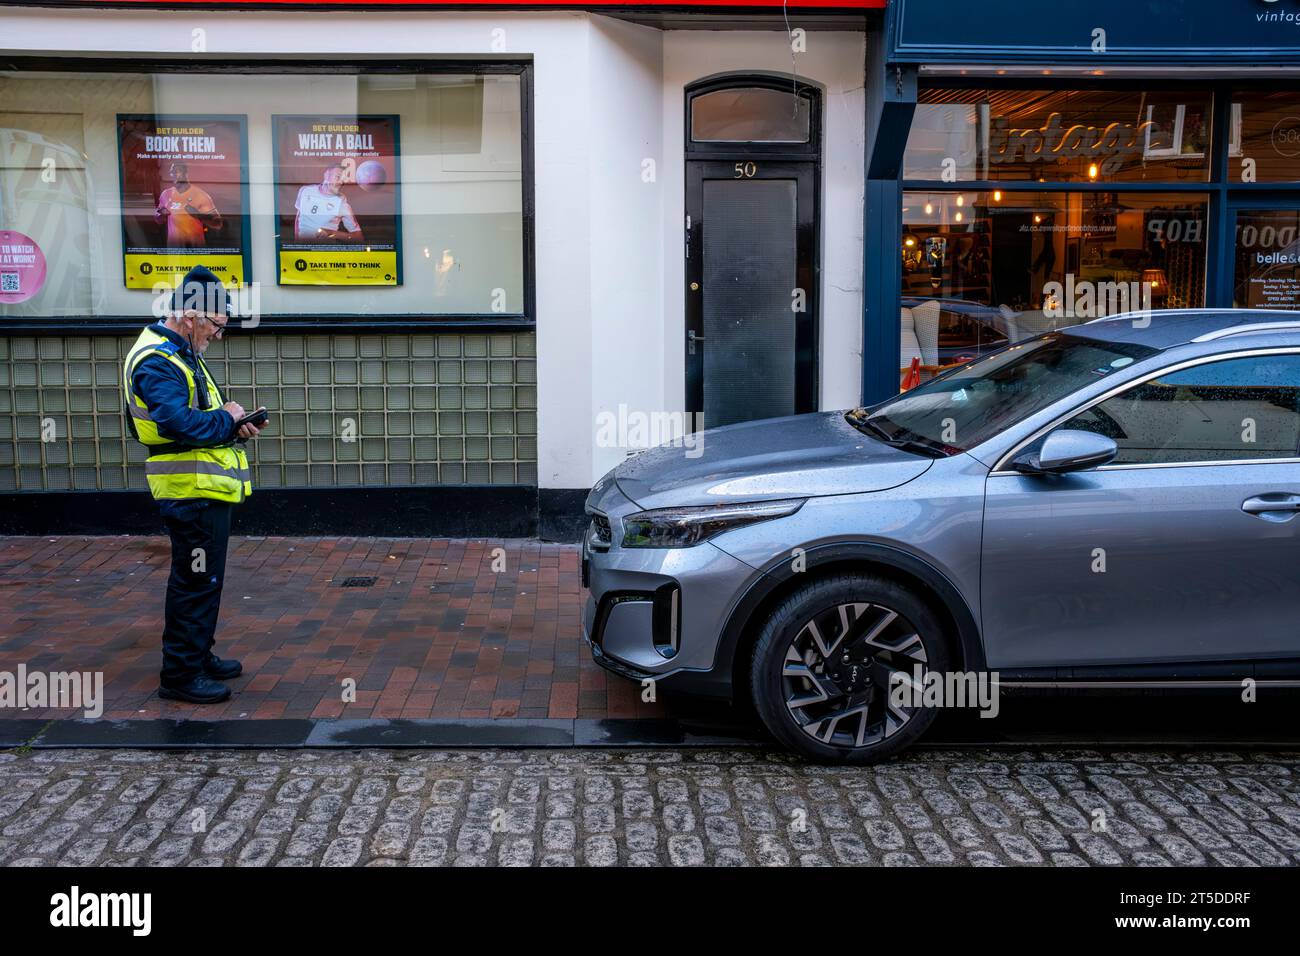 A Traffic Warden Taking Details Of An Illegally Parked Car, High Street, Lewes, East Sussex, UK Stock Photo